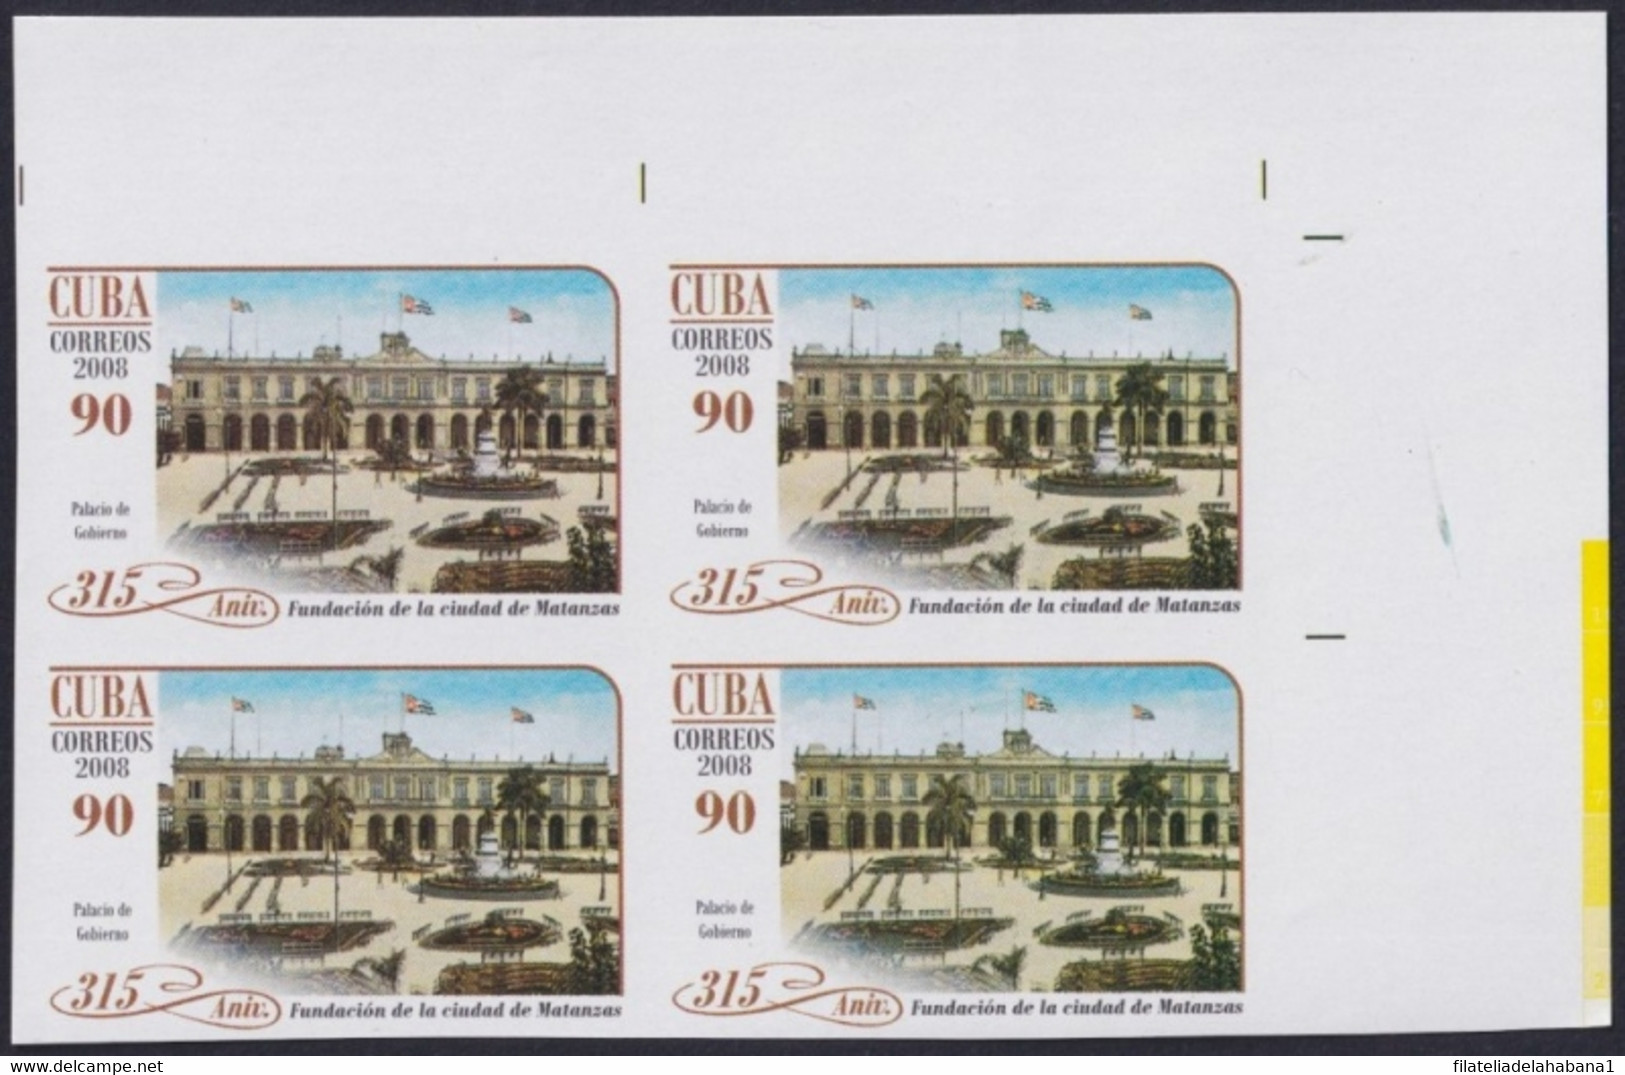 2008.414 CUBA 2008 90c MNH IMPERFORATED PROOF MATANZAS FOUNDATION GOVERNMENT PALACE. - Imperforates, Proofs & Errors